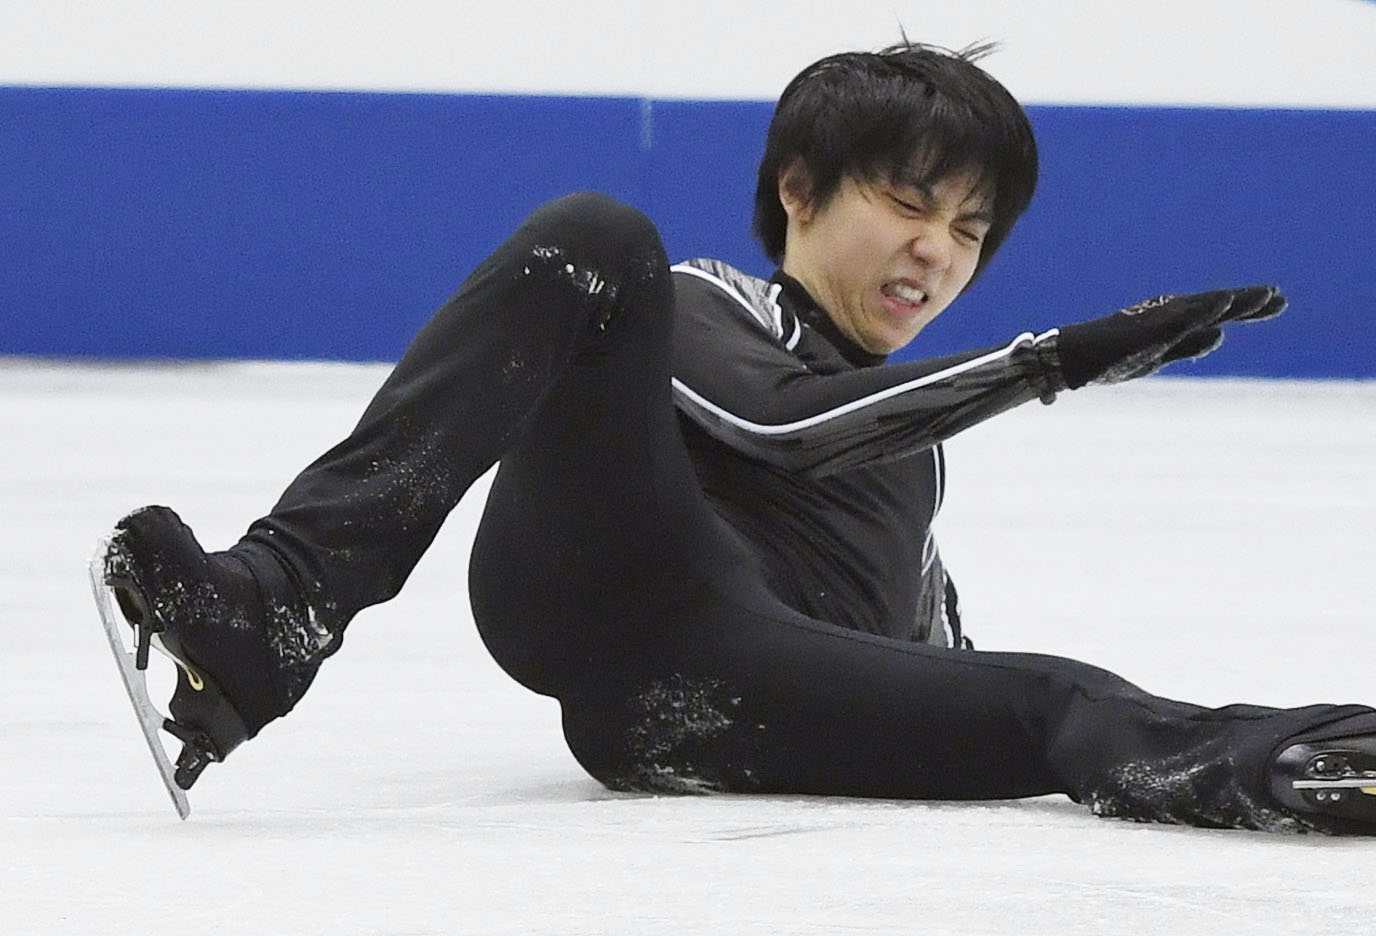 Yuzuru Hanyu falls while attempting a quad lutz during practice ahead of the NHK Trophy on Nov. 9. Hanyu was injured in the fall and hasn't competed since. The Japan Skating Federation announced Monday that Hanyu will miss the national championships because of the injury. | KYODO